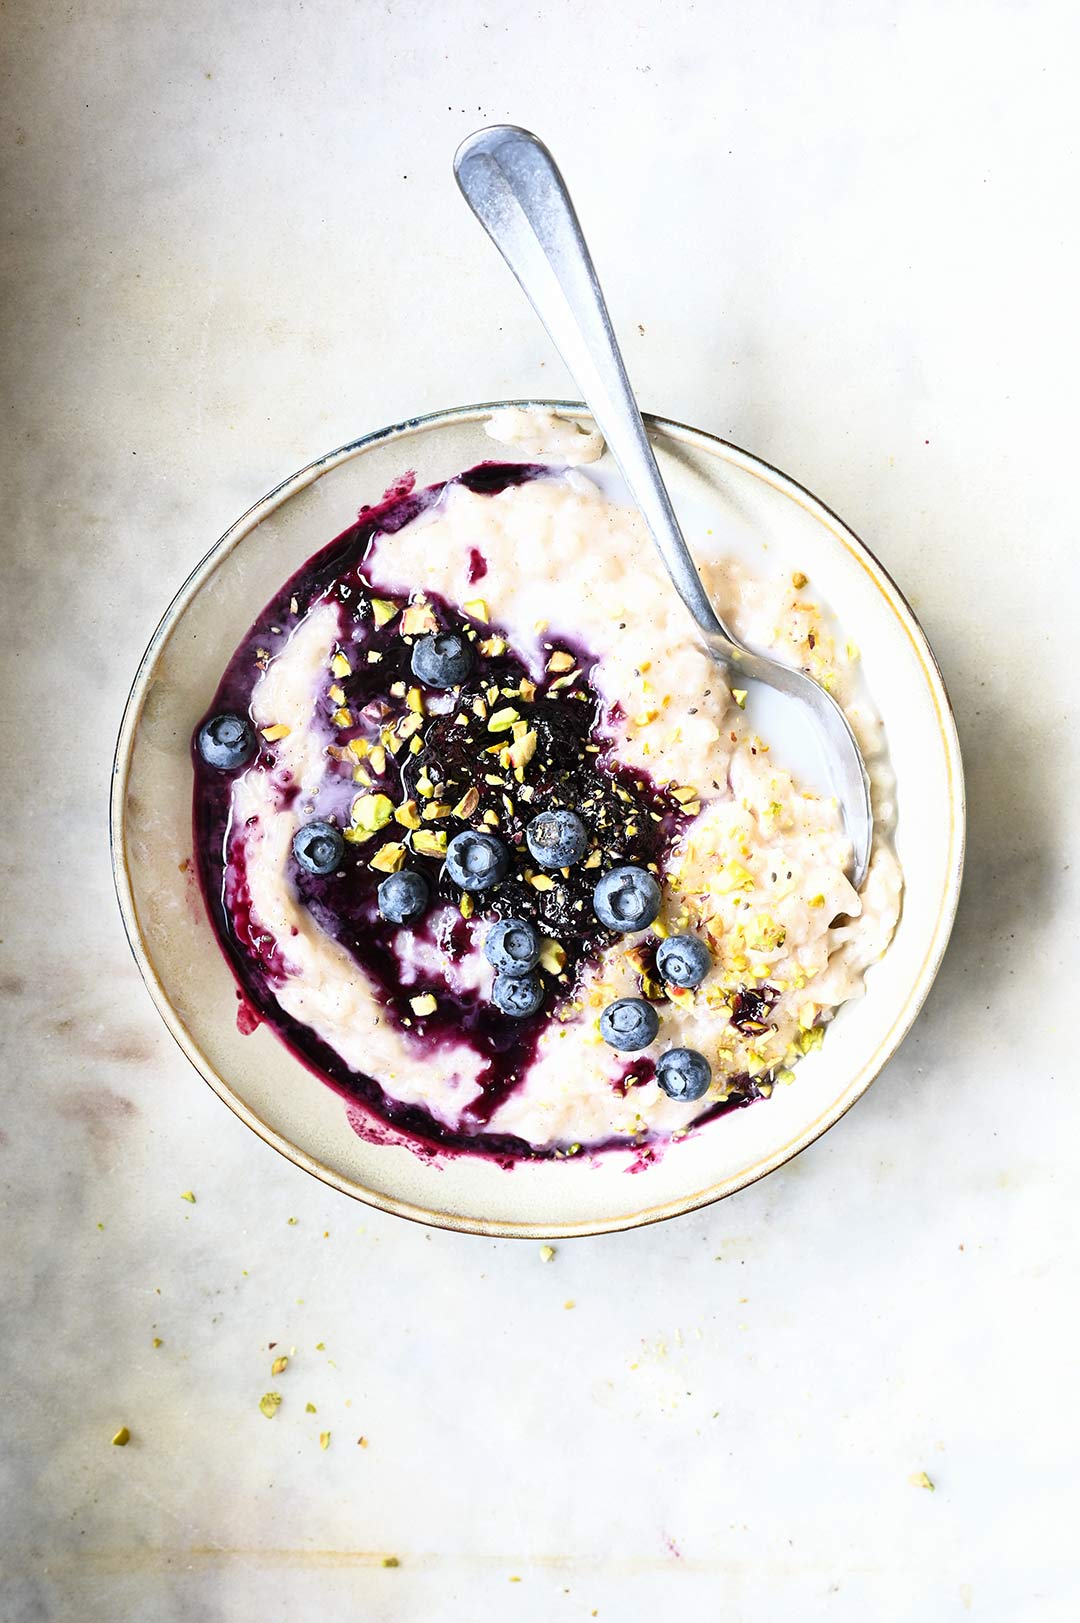 serving dumplings | Coconut Rice Pudding with Ginger Blueberries